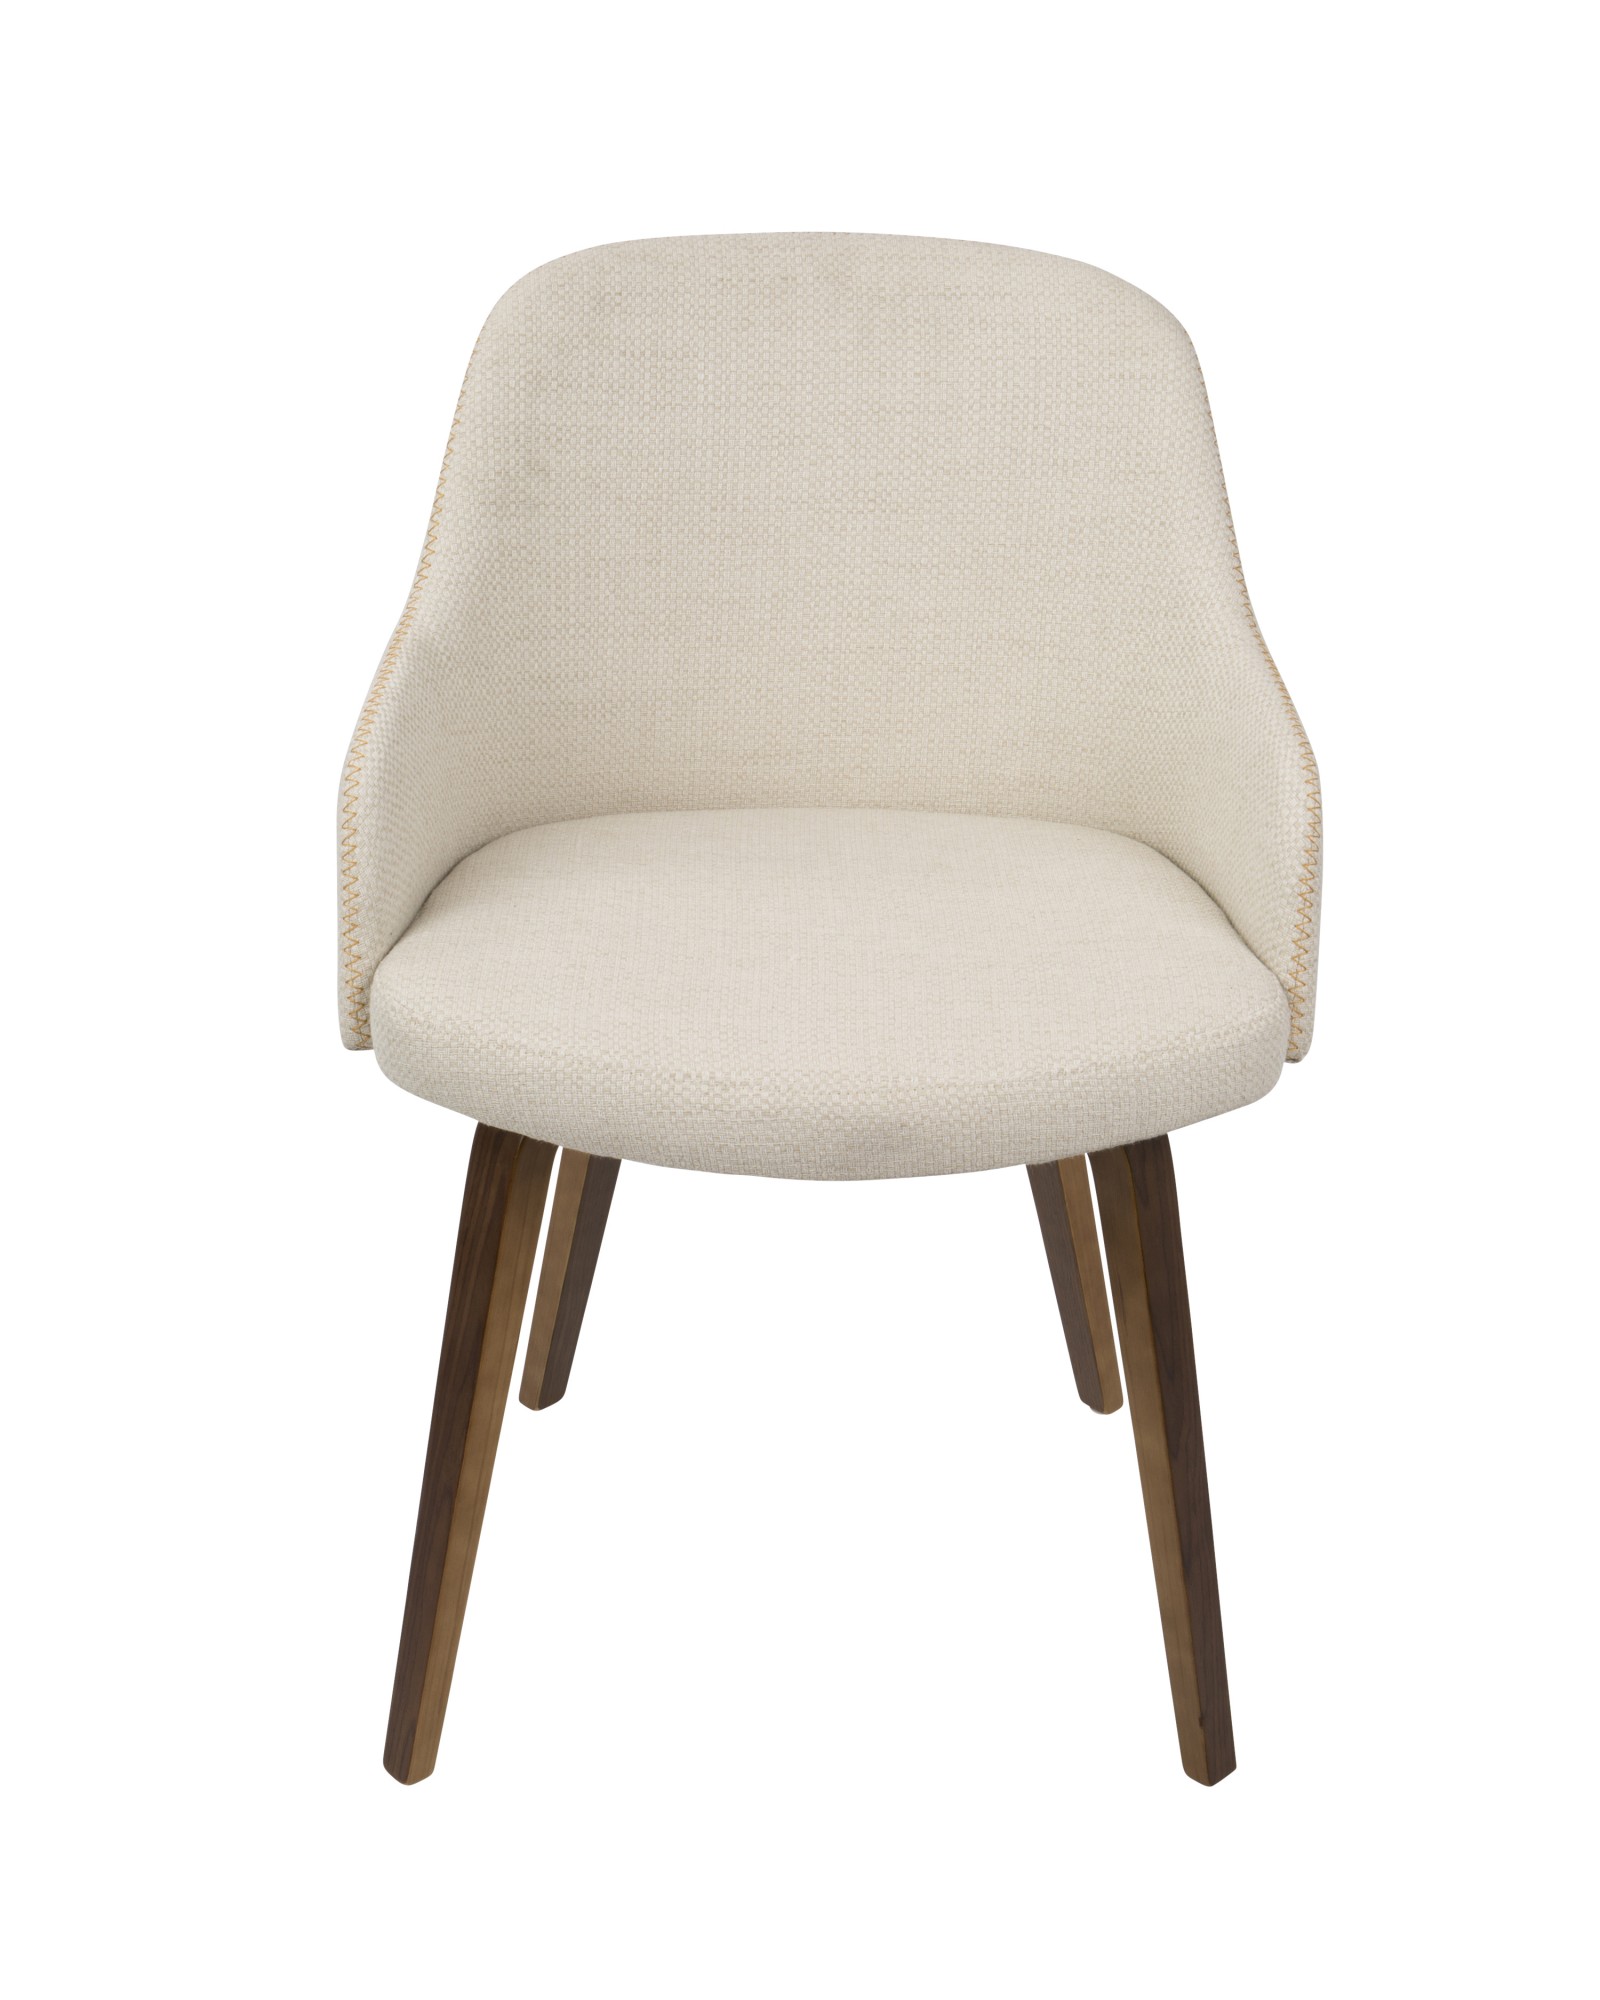 Bacci Mid-Century Modern Dining/ Accent Chair in Walnut Wood and Cream Fabric